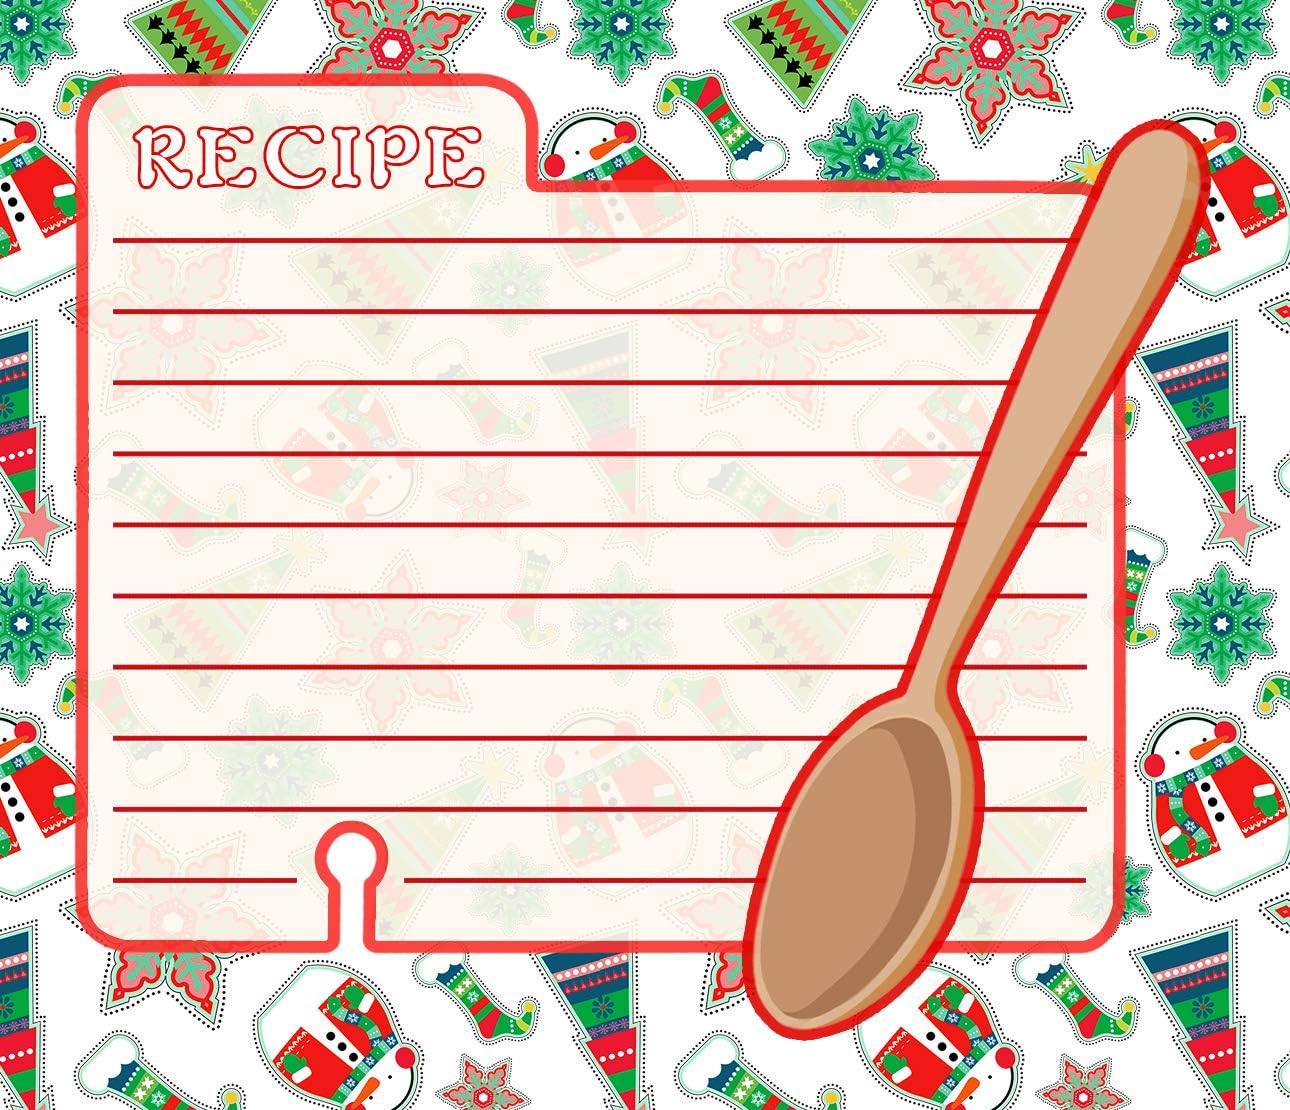 Christmas - Holiday Baking Kitchen Linen Set (6 Piece) - 2 Kitchen Towel, 2 Pot Holders, 1 Oven Mitt, 1 Magnetic Dry Erase Recipe Planner (Style 03)